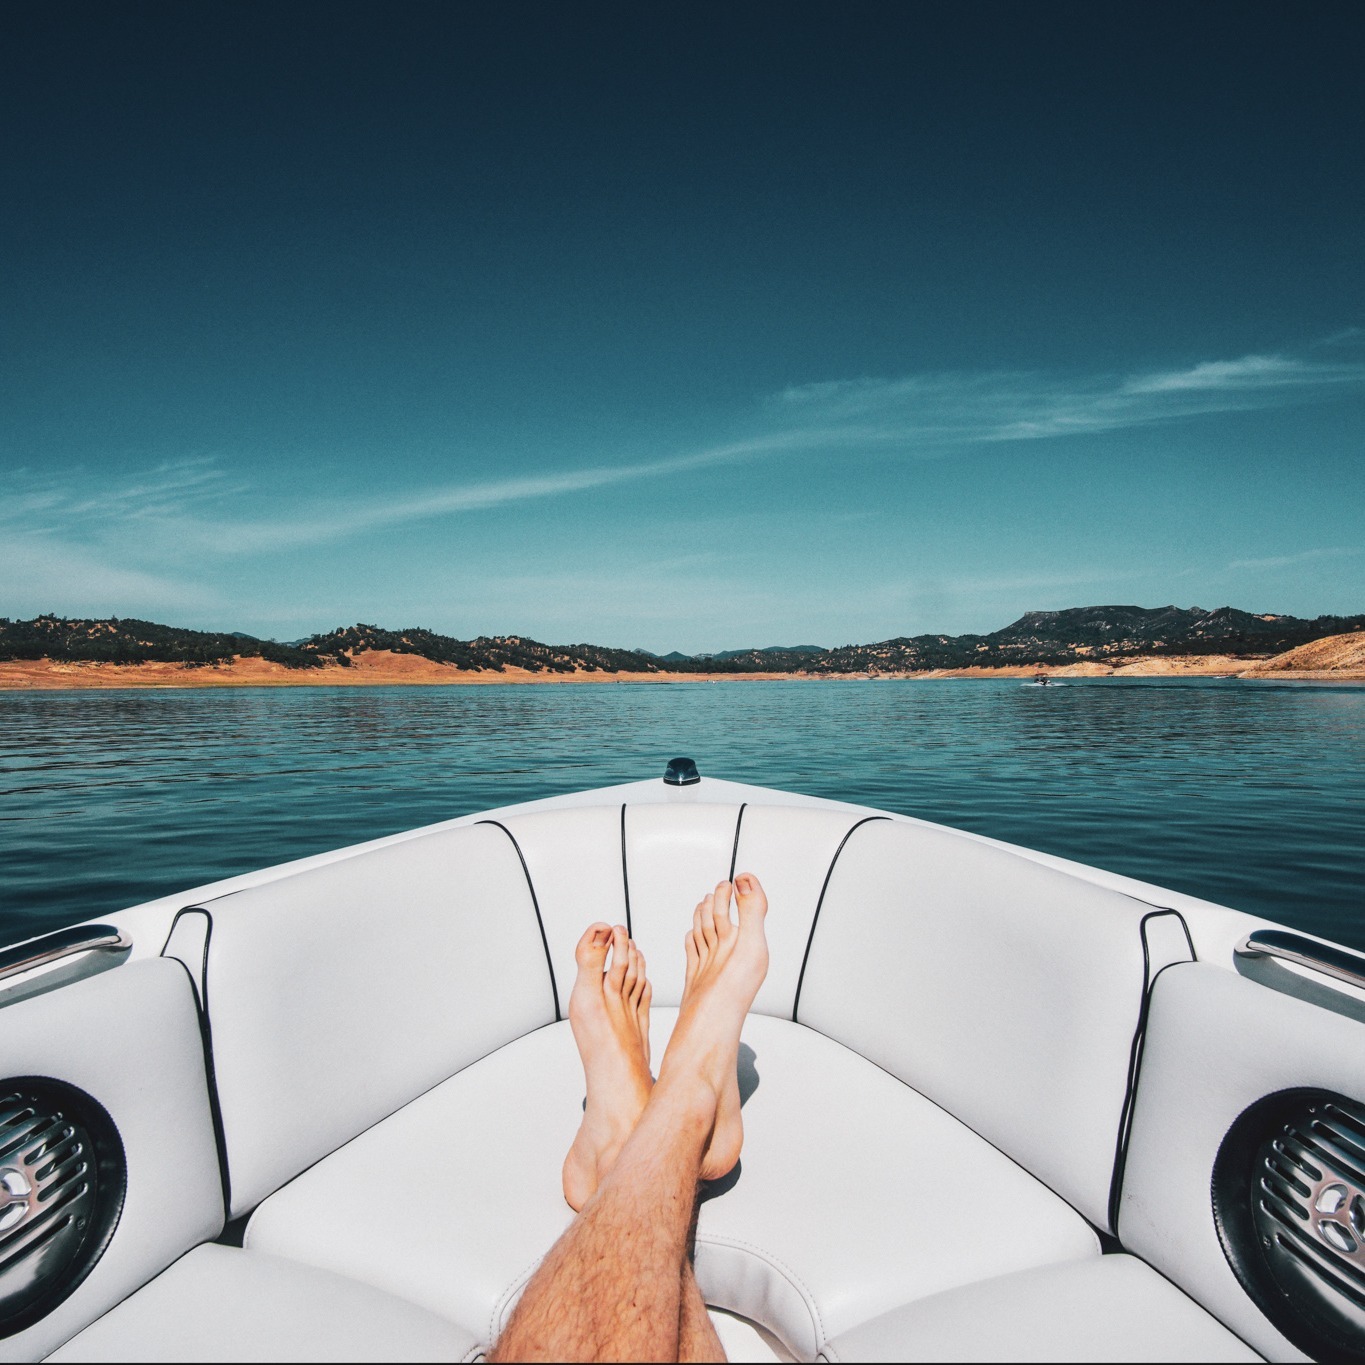 Go ahead. Rock the boat.
Swipe or see link in bio for 10 tips on attending a concert from your boat. 🛥️🎸🤘
#SeeYouOutHere #DiscoverBoating